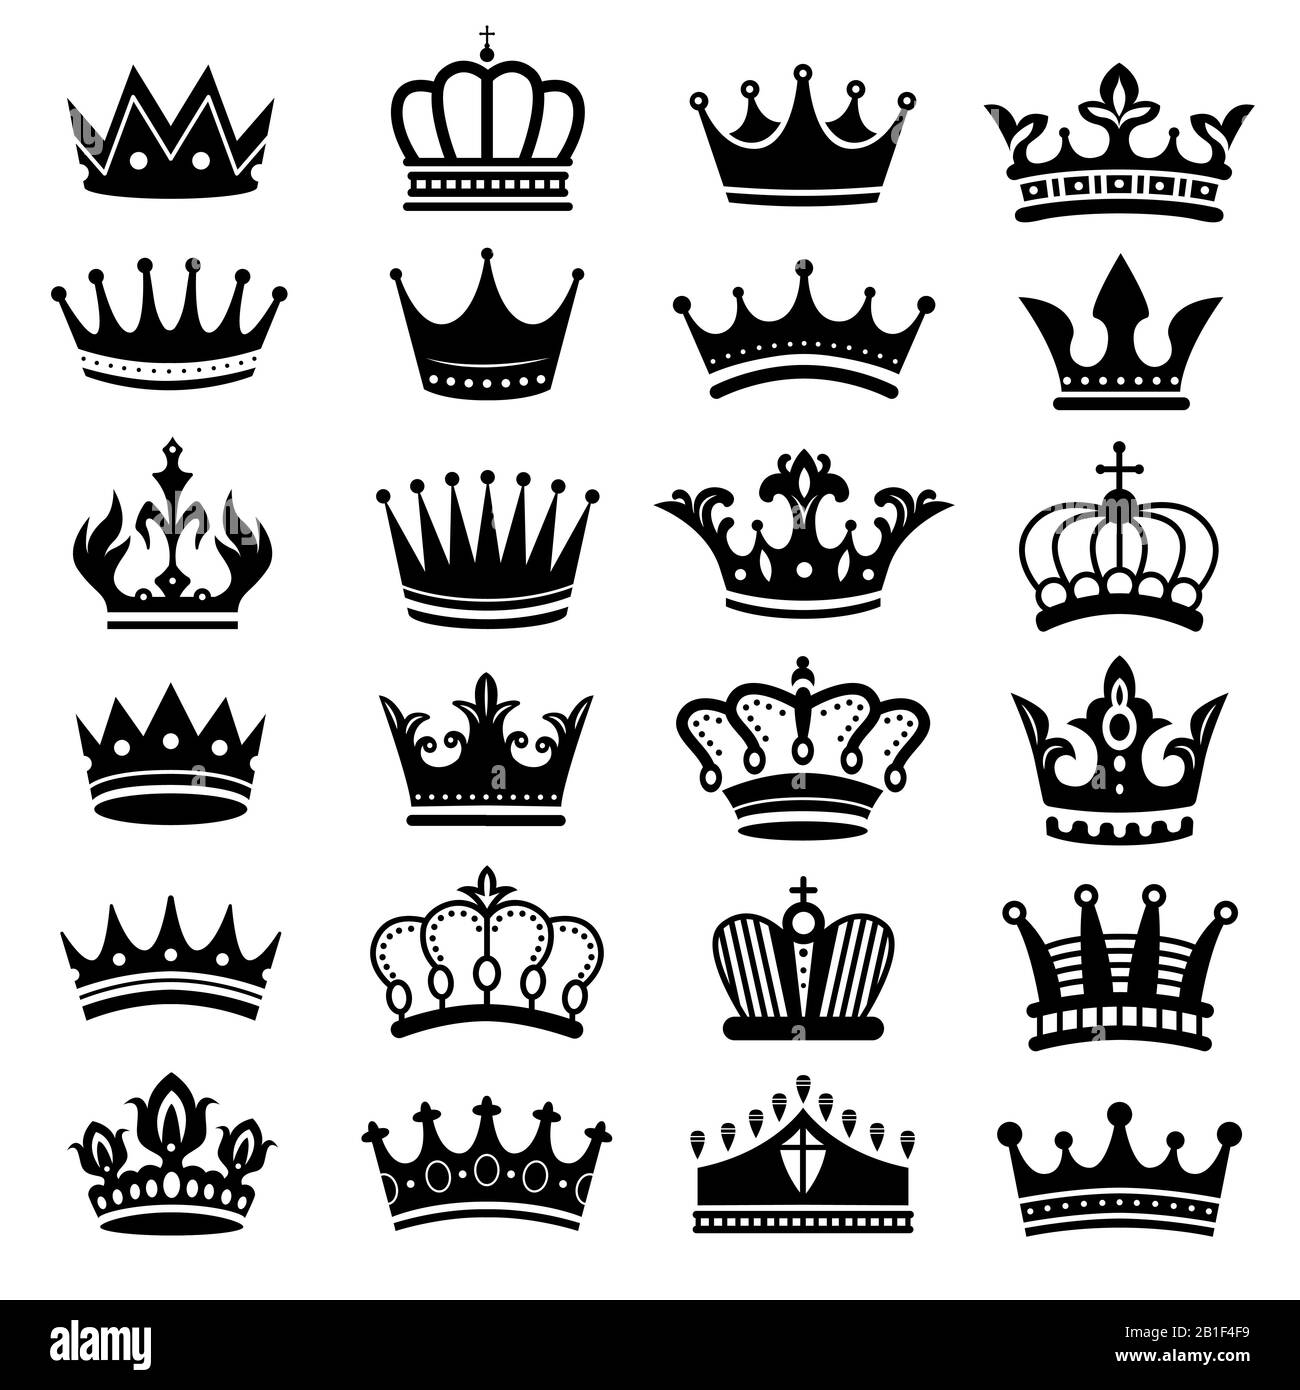 Royal crown silhouette. King crowns, majestic coronet and luxury tiara silhouettes vector set Stock Vector